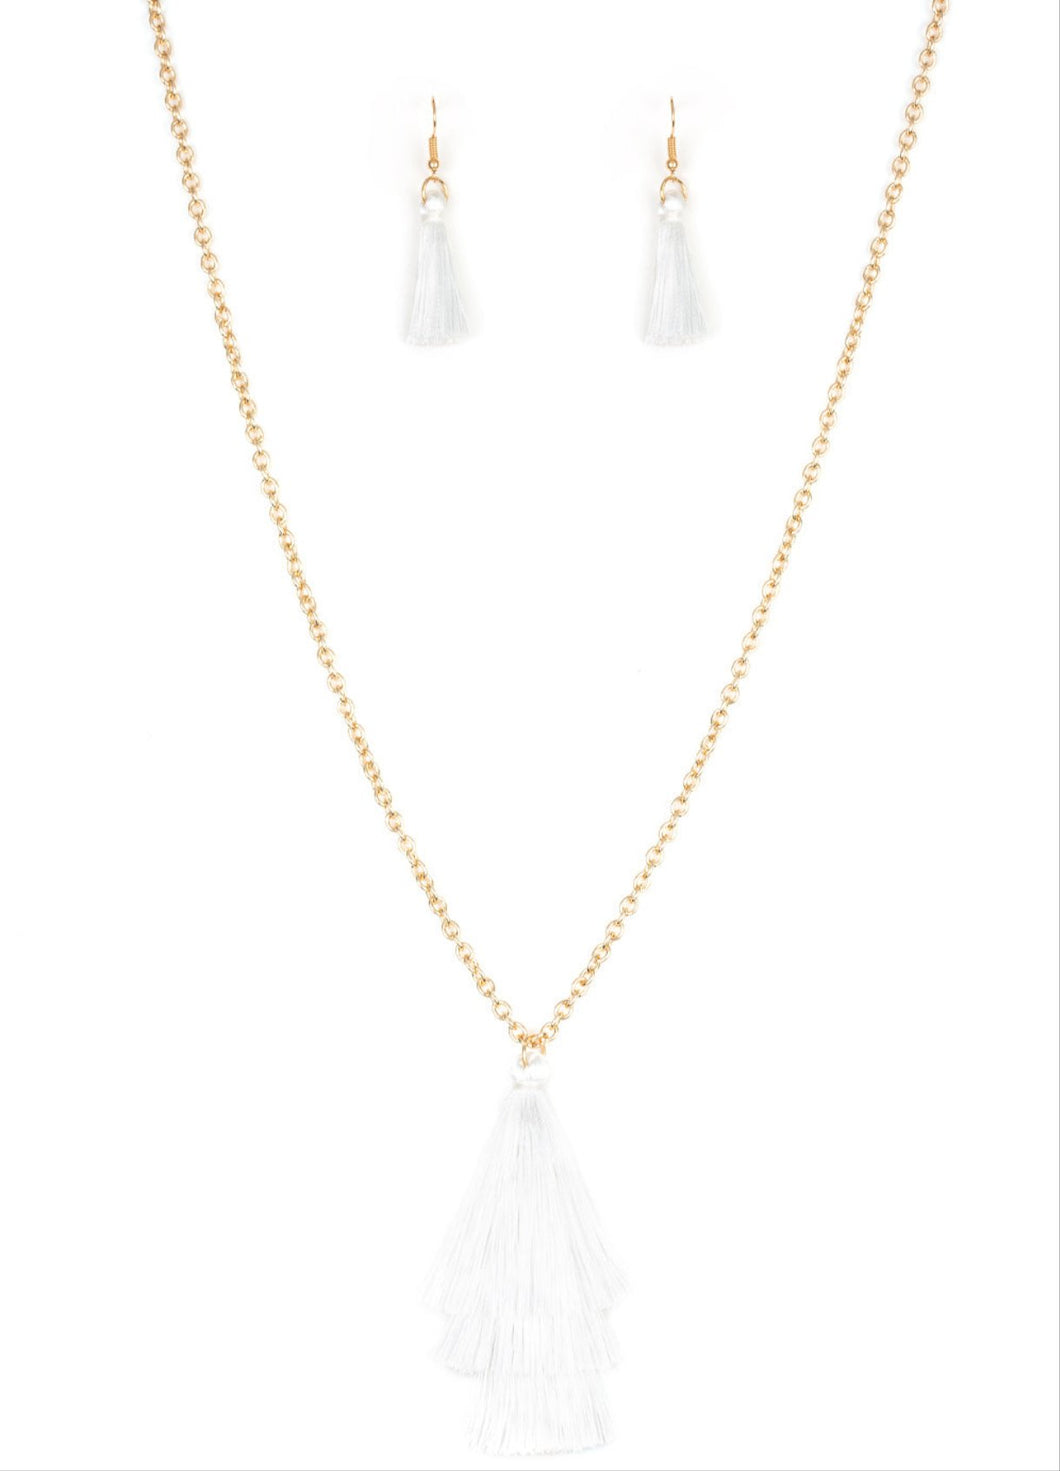 Triple The Tassel White Necklace and Earrings